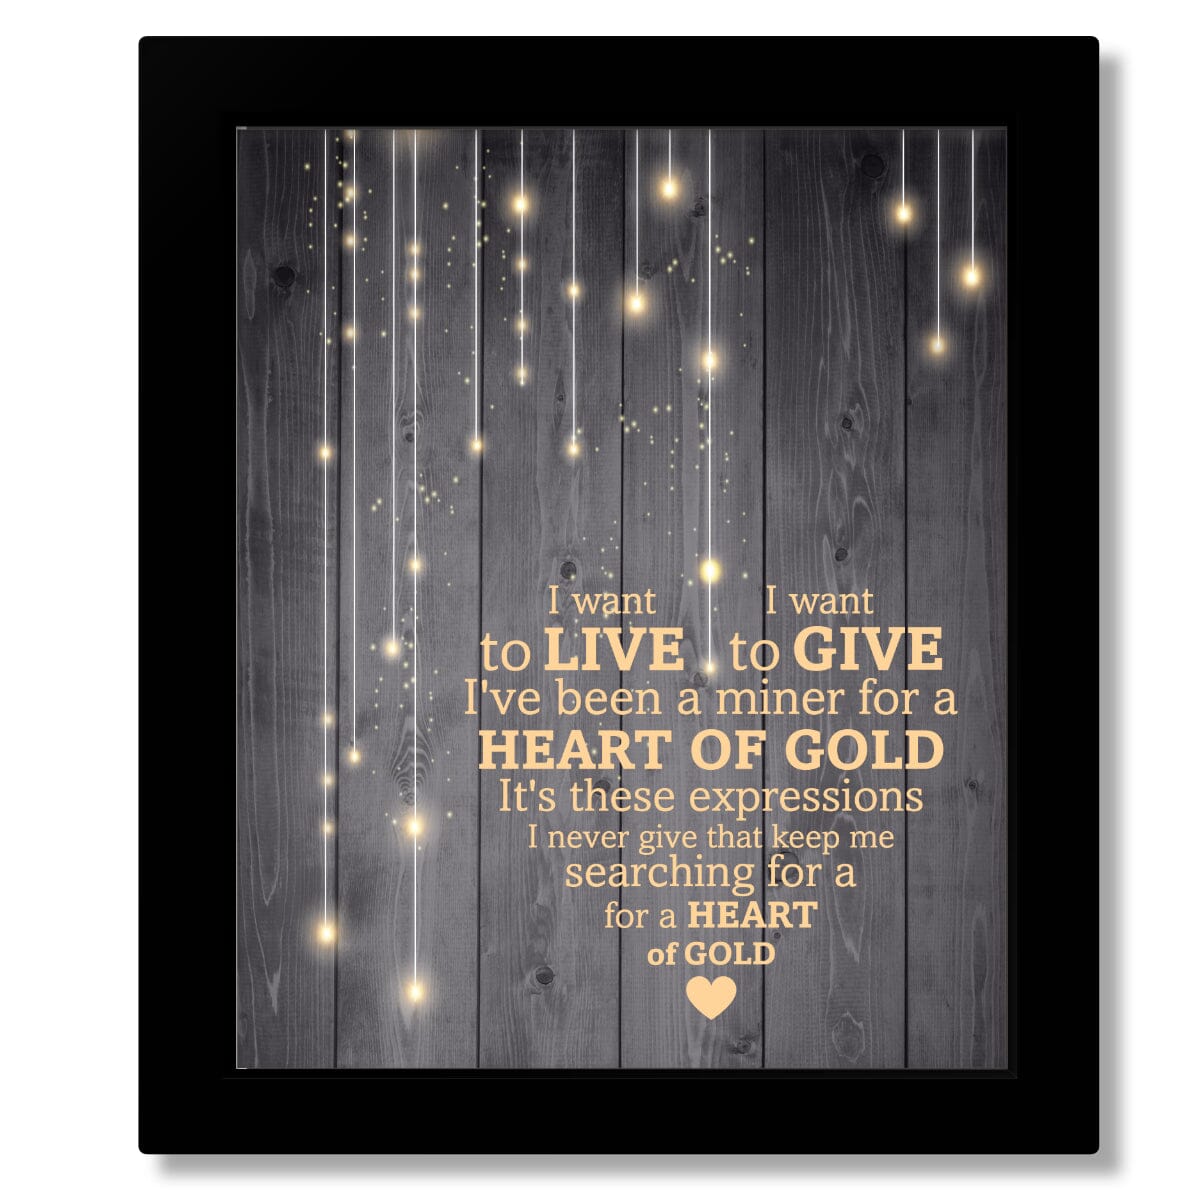 Heart of Gold by Neil Young - Lyric Song Art Wall Print Song Lyrics Art Song Lyrics Art 8x10 Framed Print (without mat) 